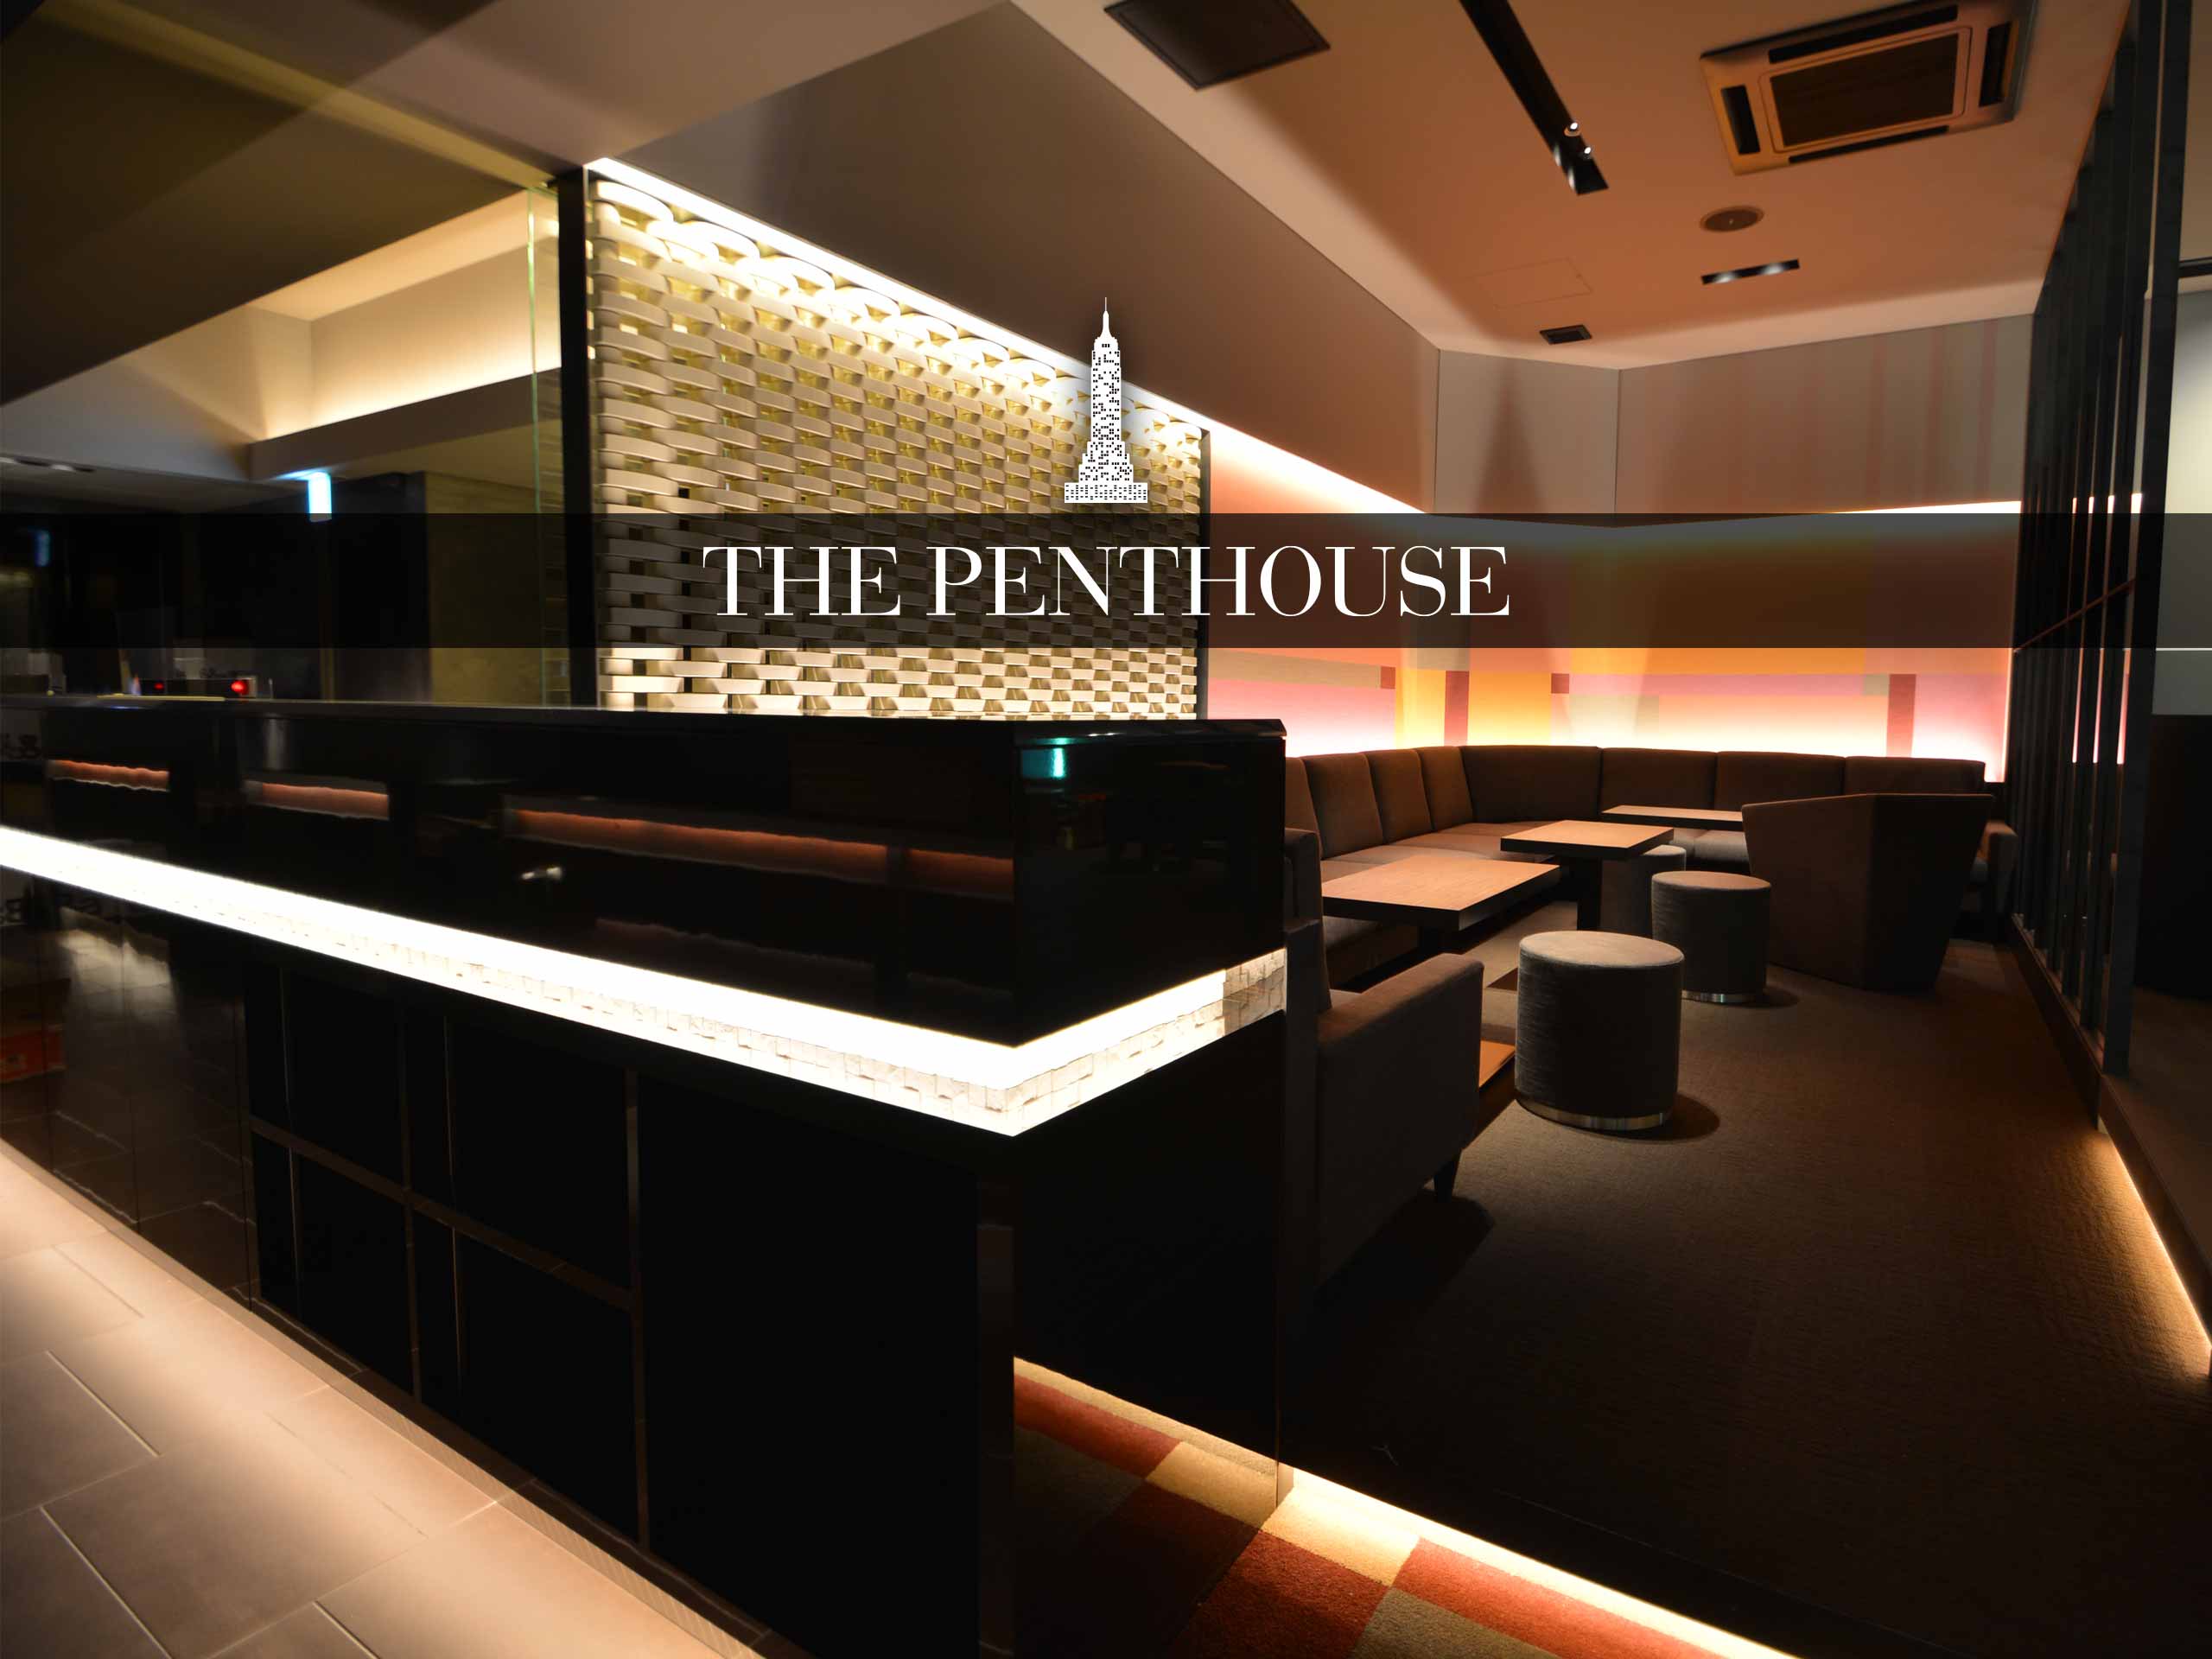 THE PENTHOUSEの画像